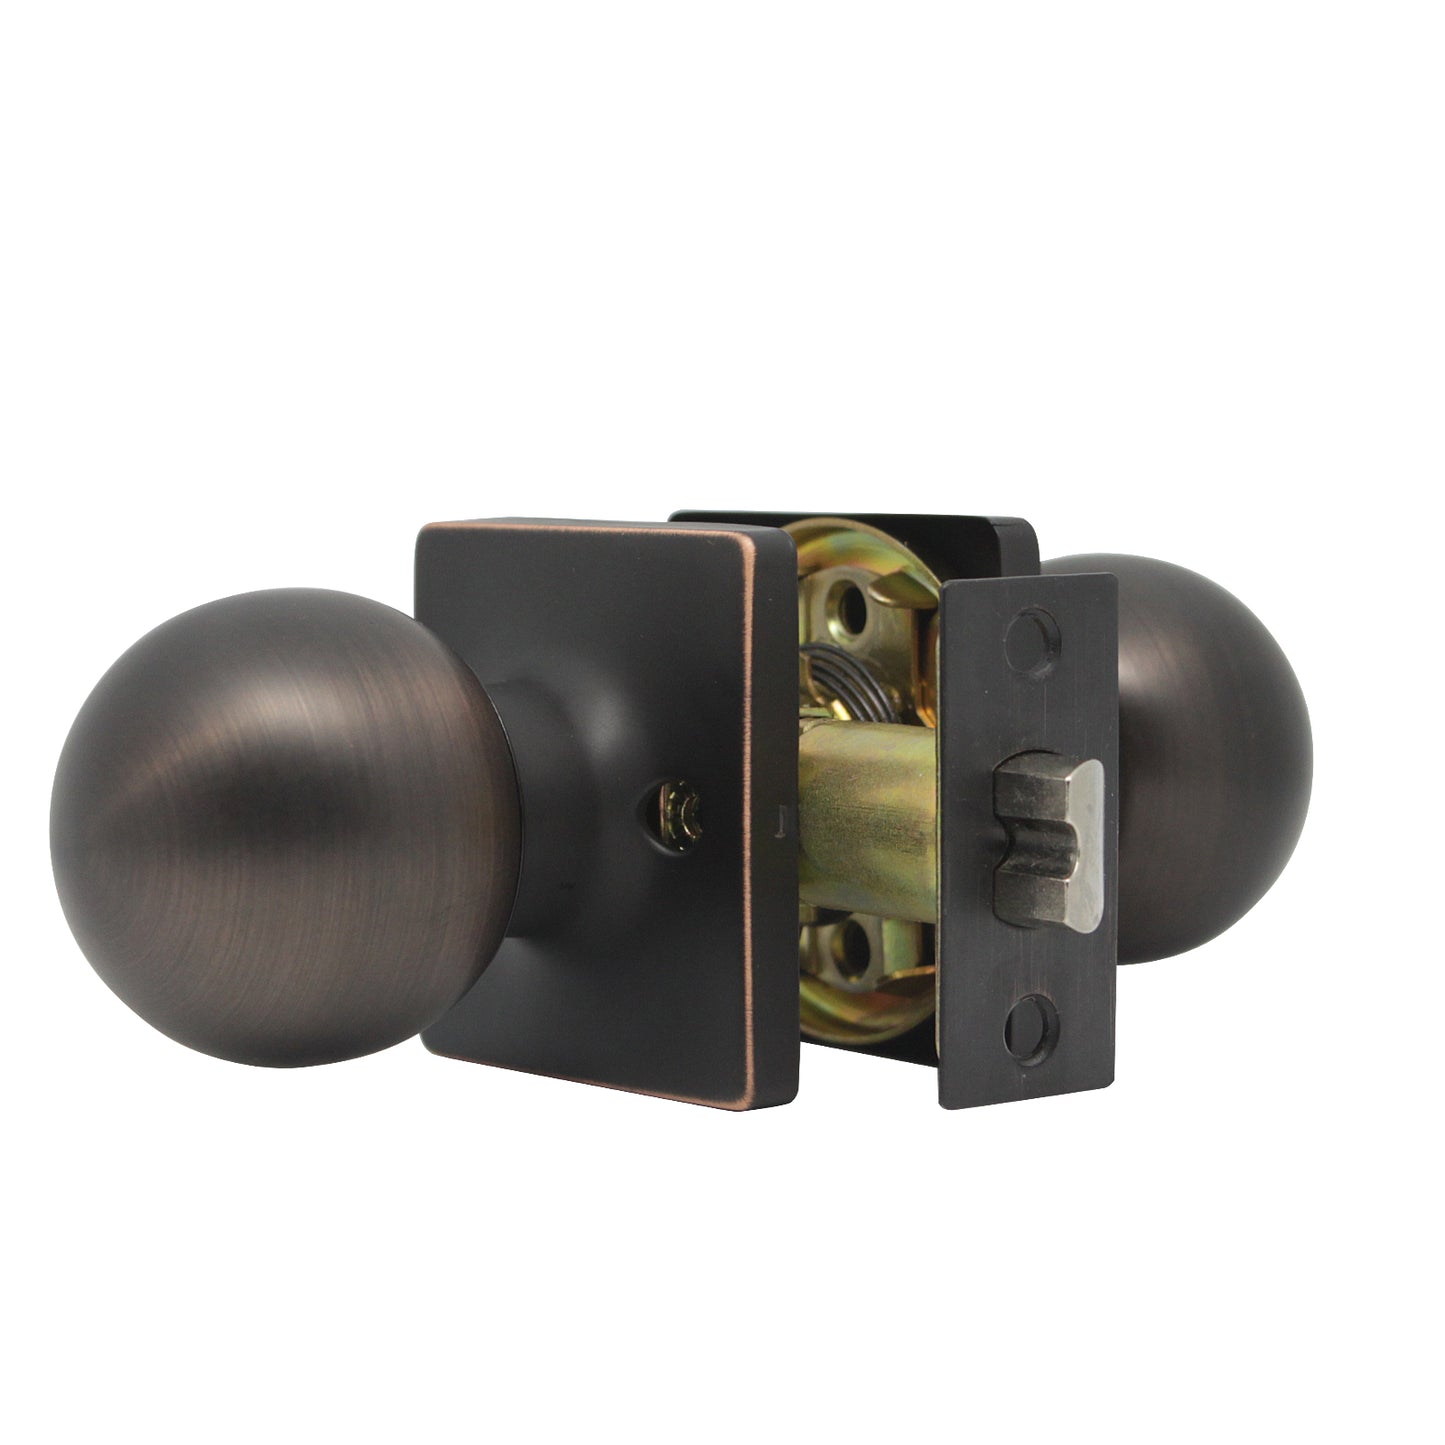 Round Ball Knob with Square Rosette, Interior Passage Door Knobs Oil Rubbed Bronze DLS07ORBPS - Probrico